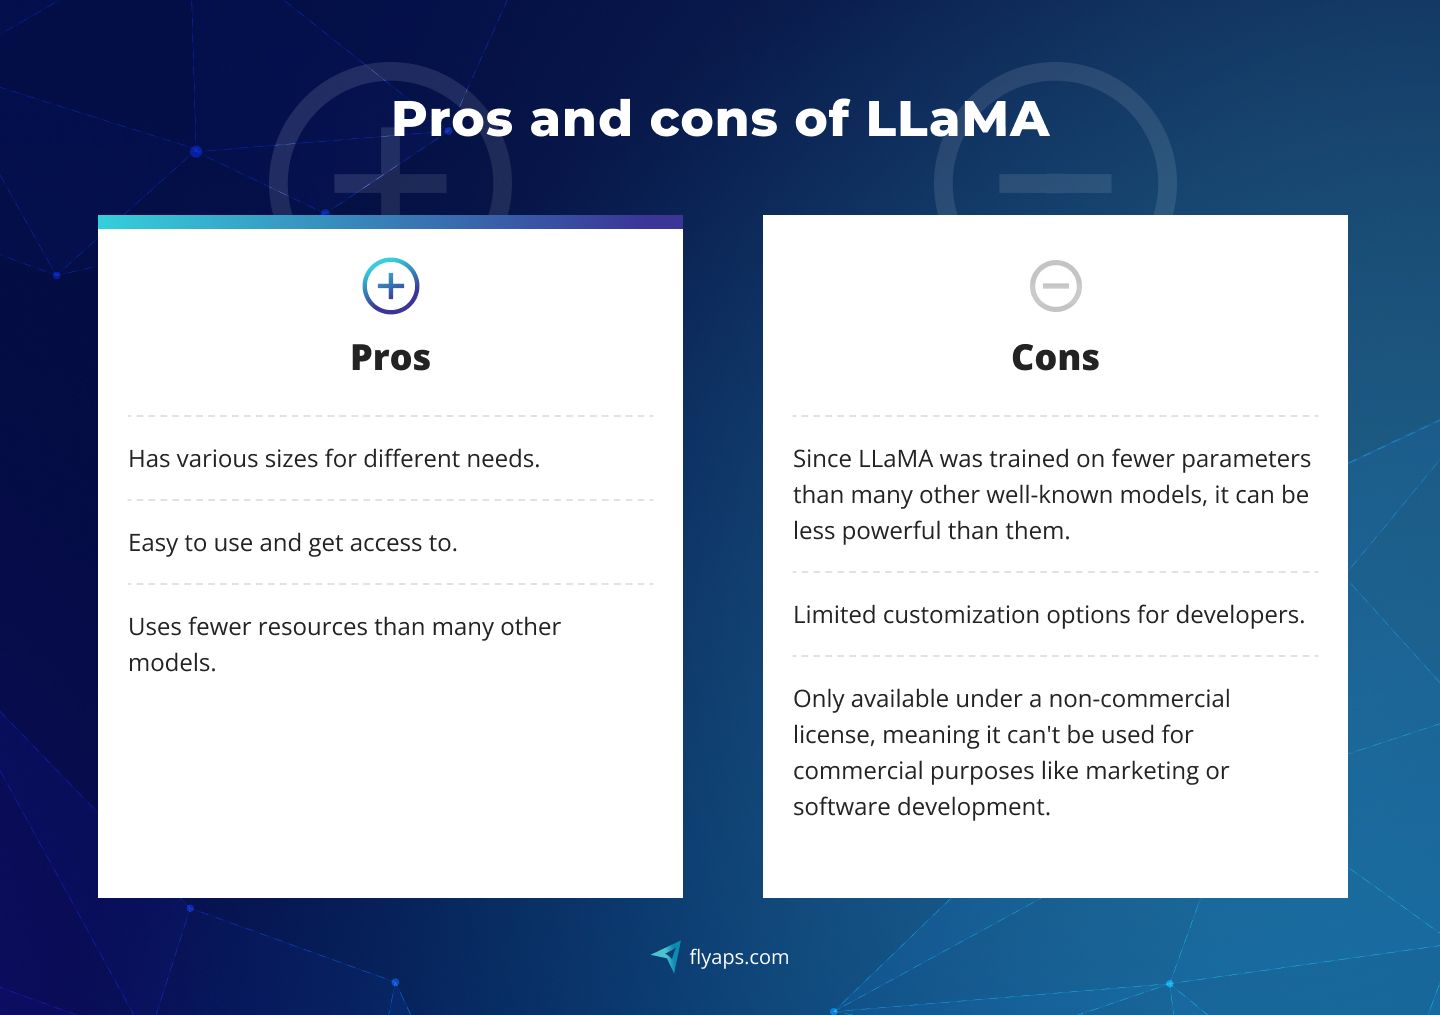 Pros and cons of LLaMA